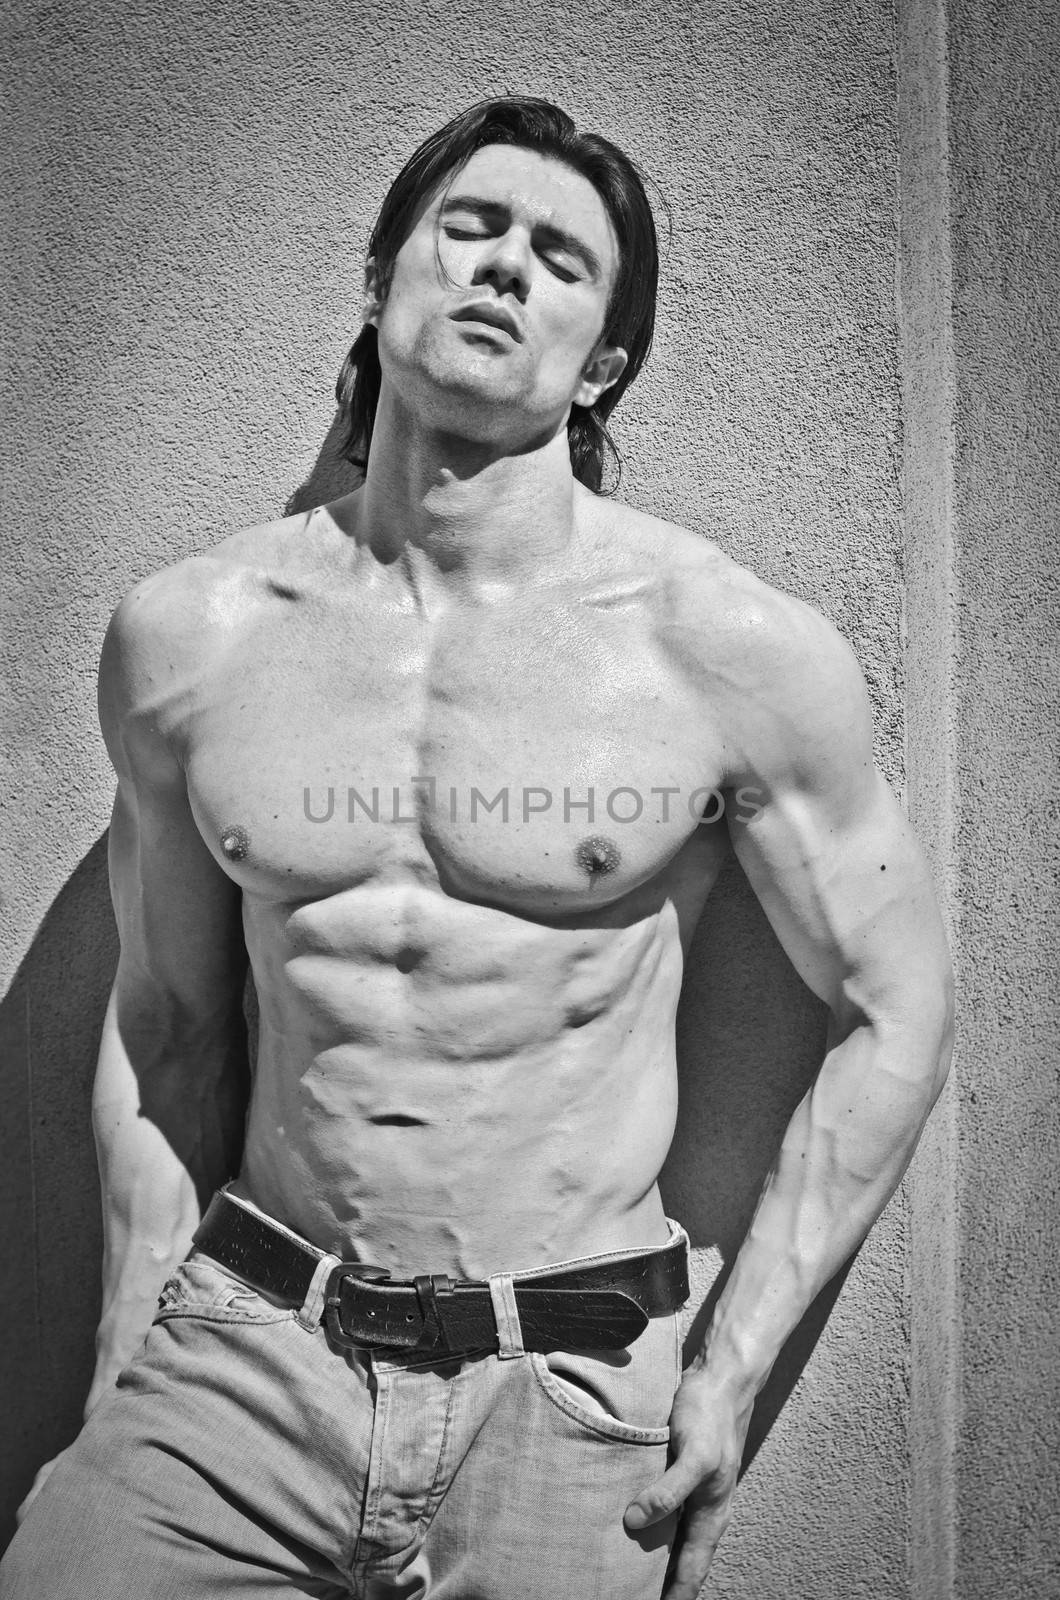 Attractive young man shirtless with jeans leaning against a wall with his eyes closed, black and white shot